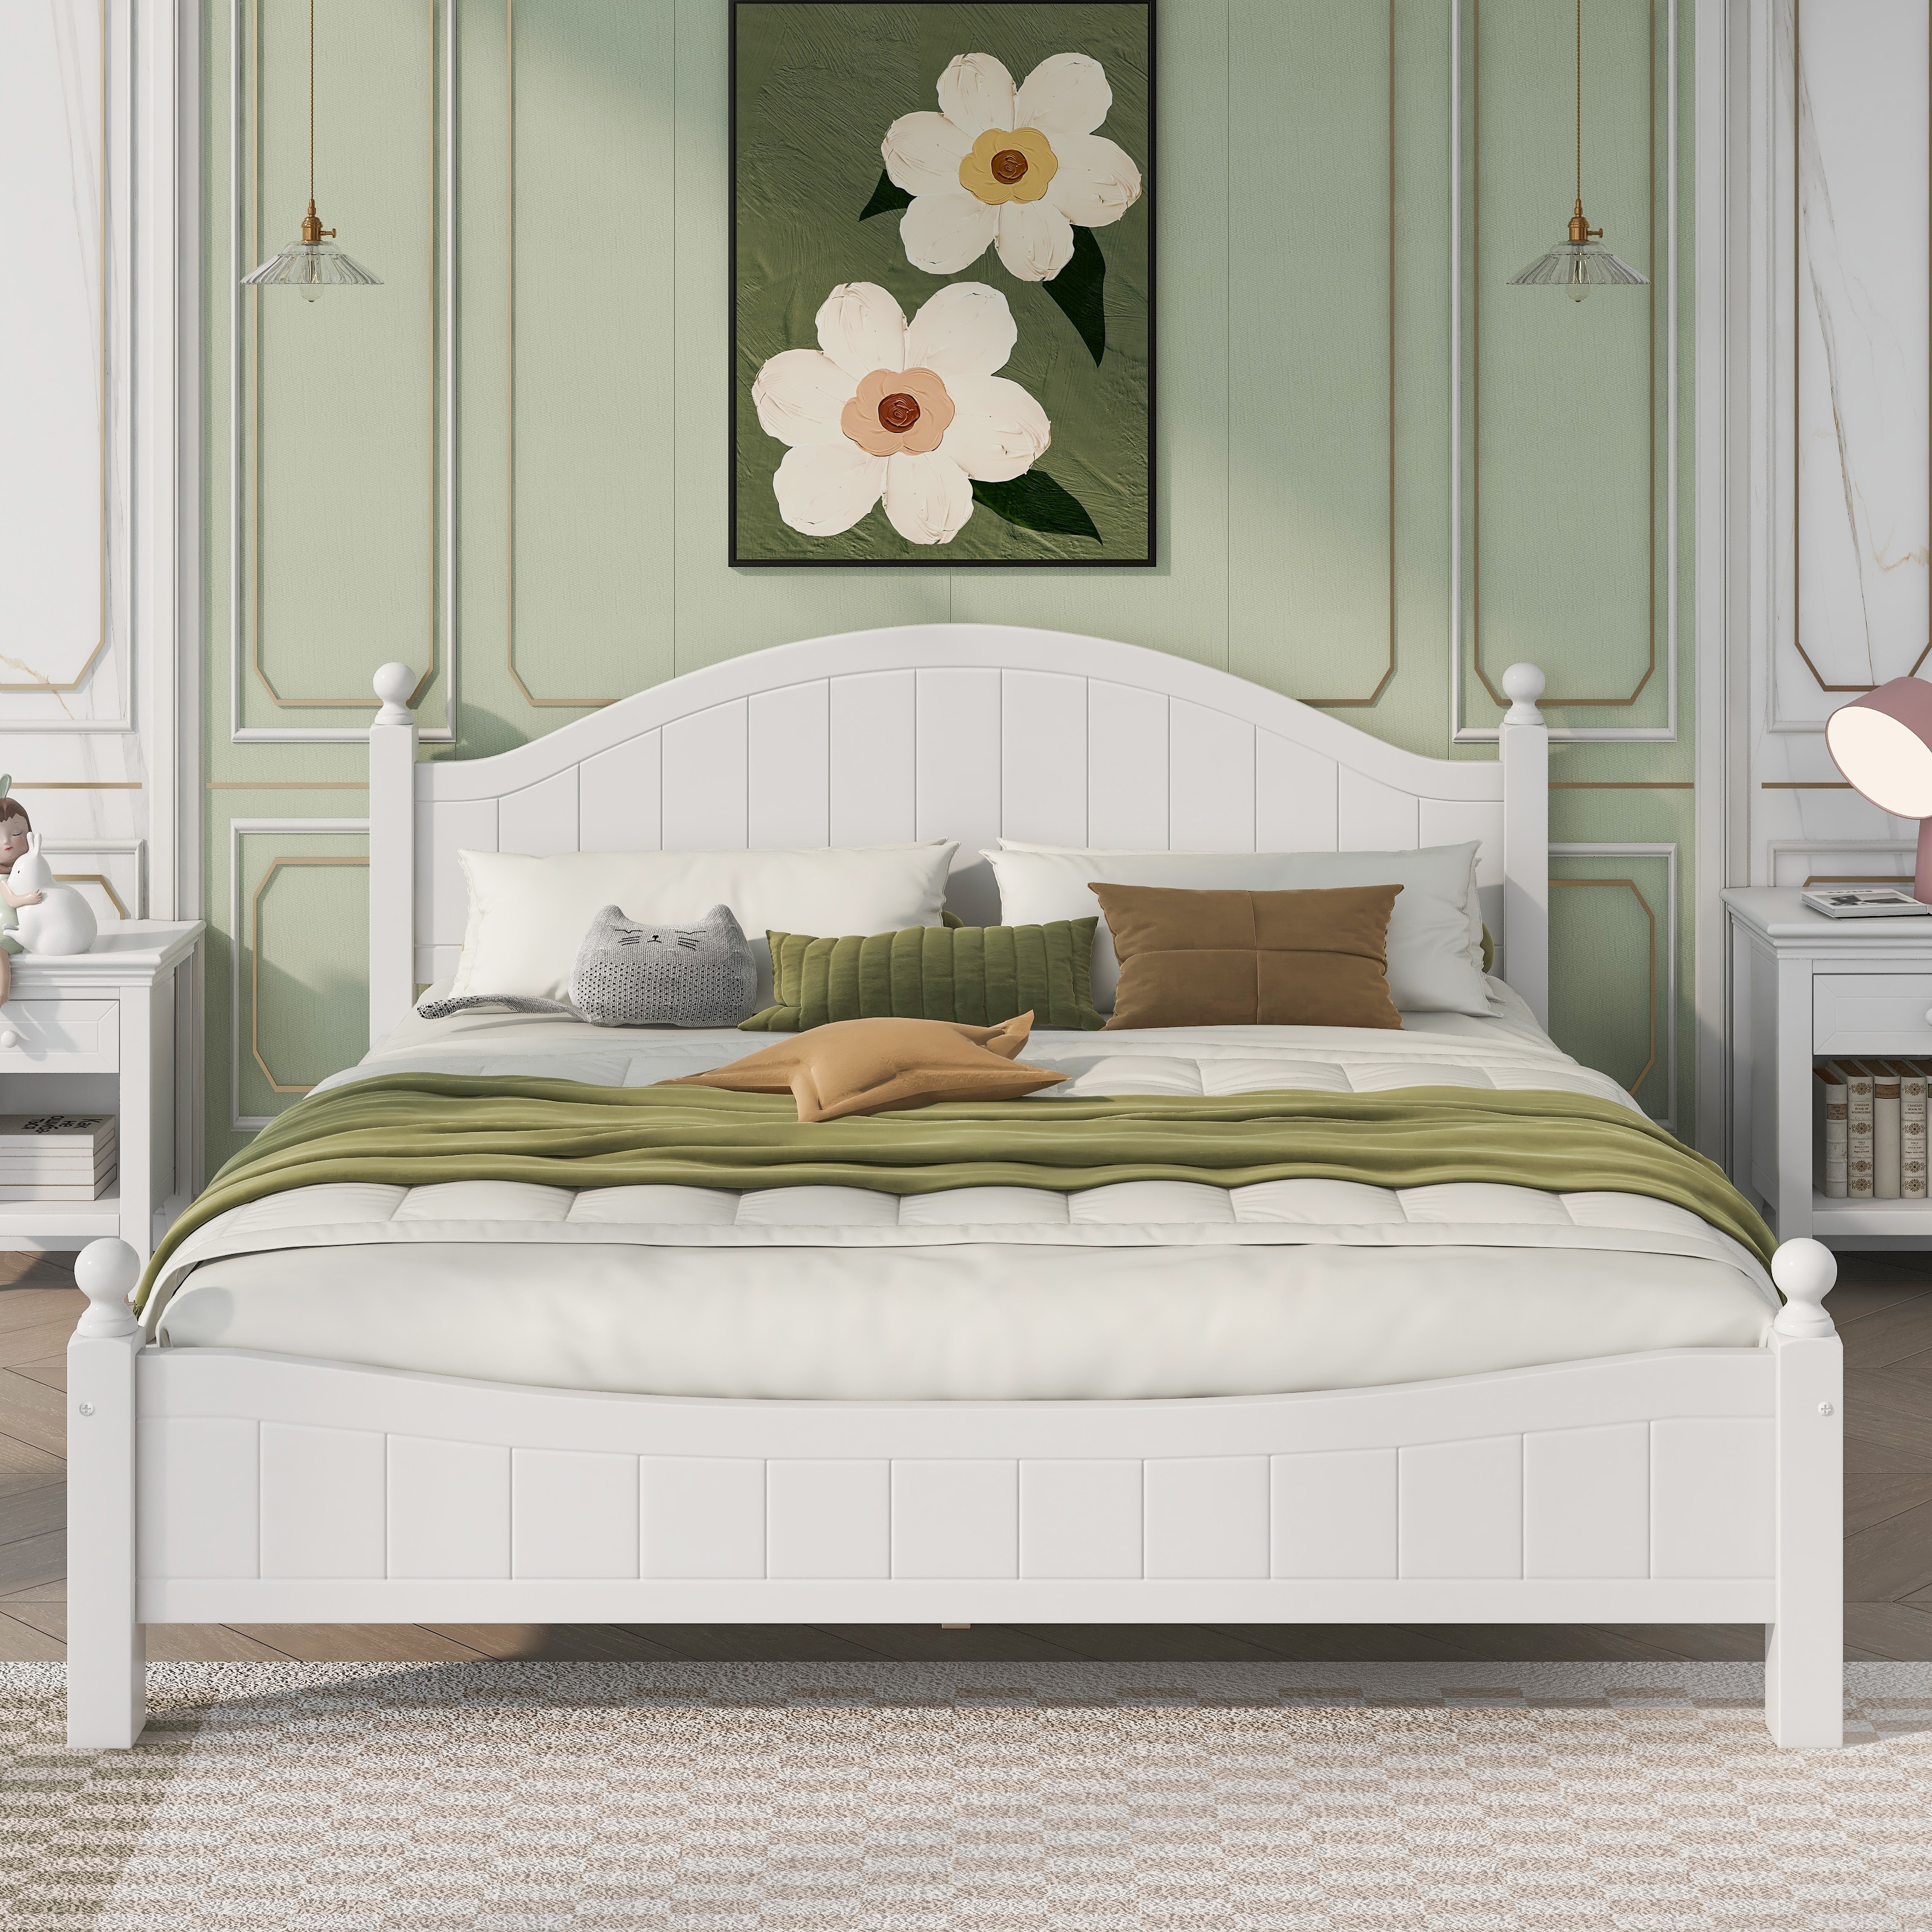 Concise Style Solid Wood Full Size Platform Bed